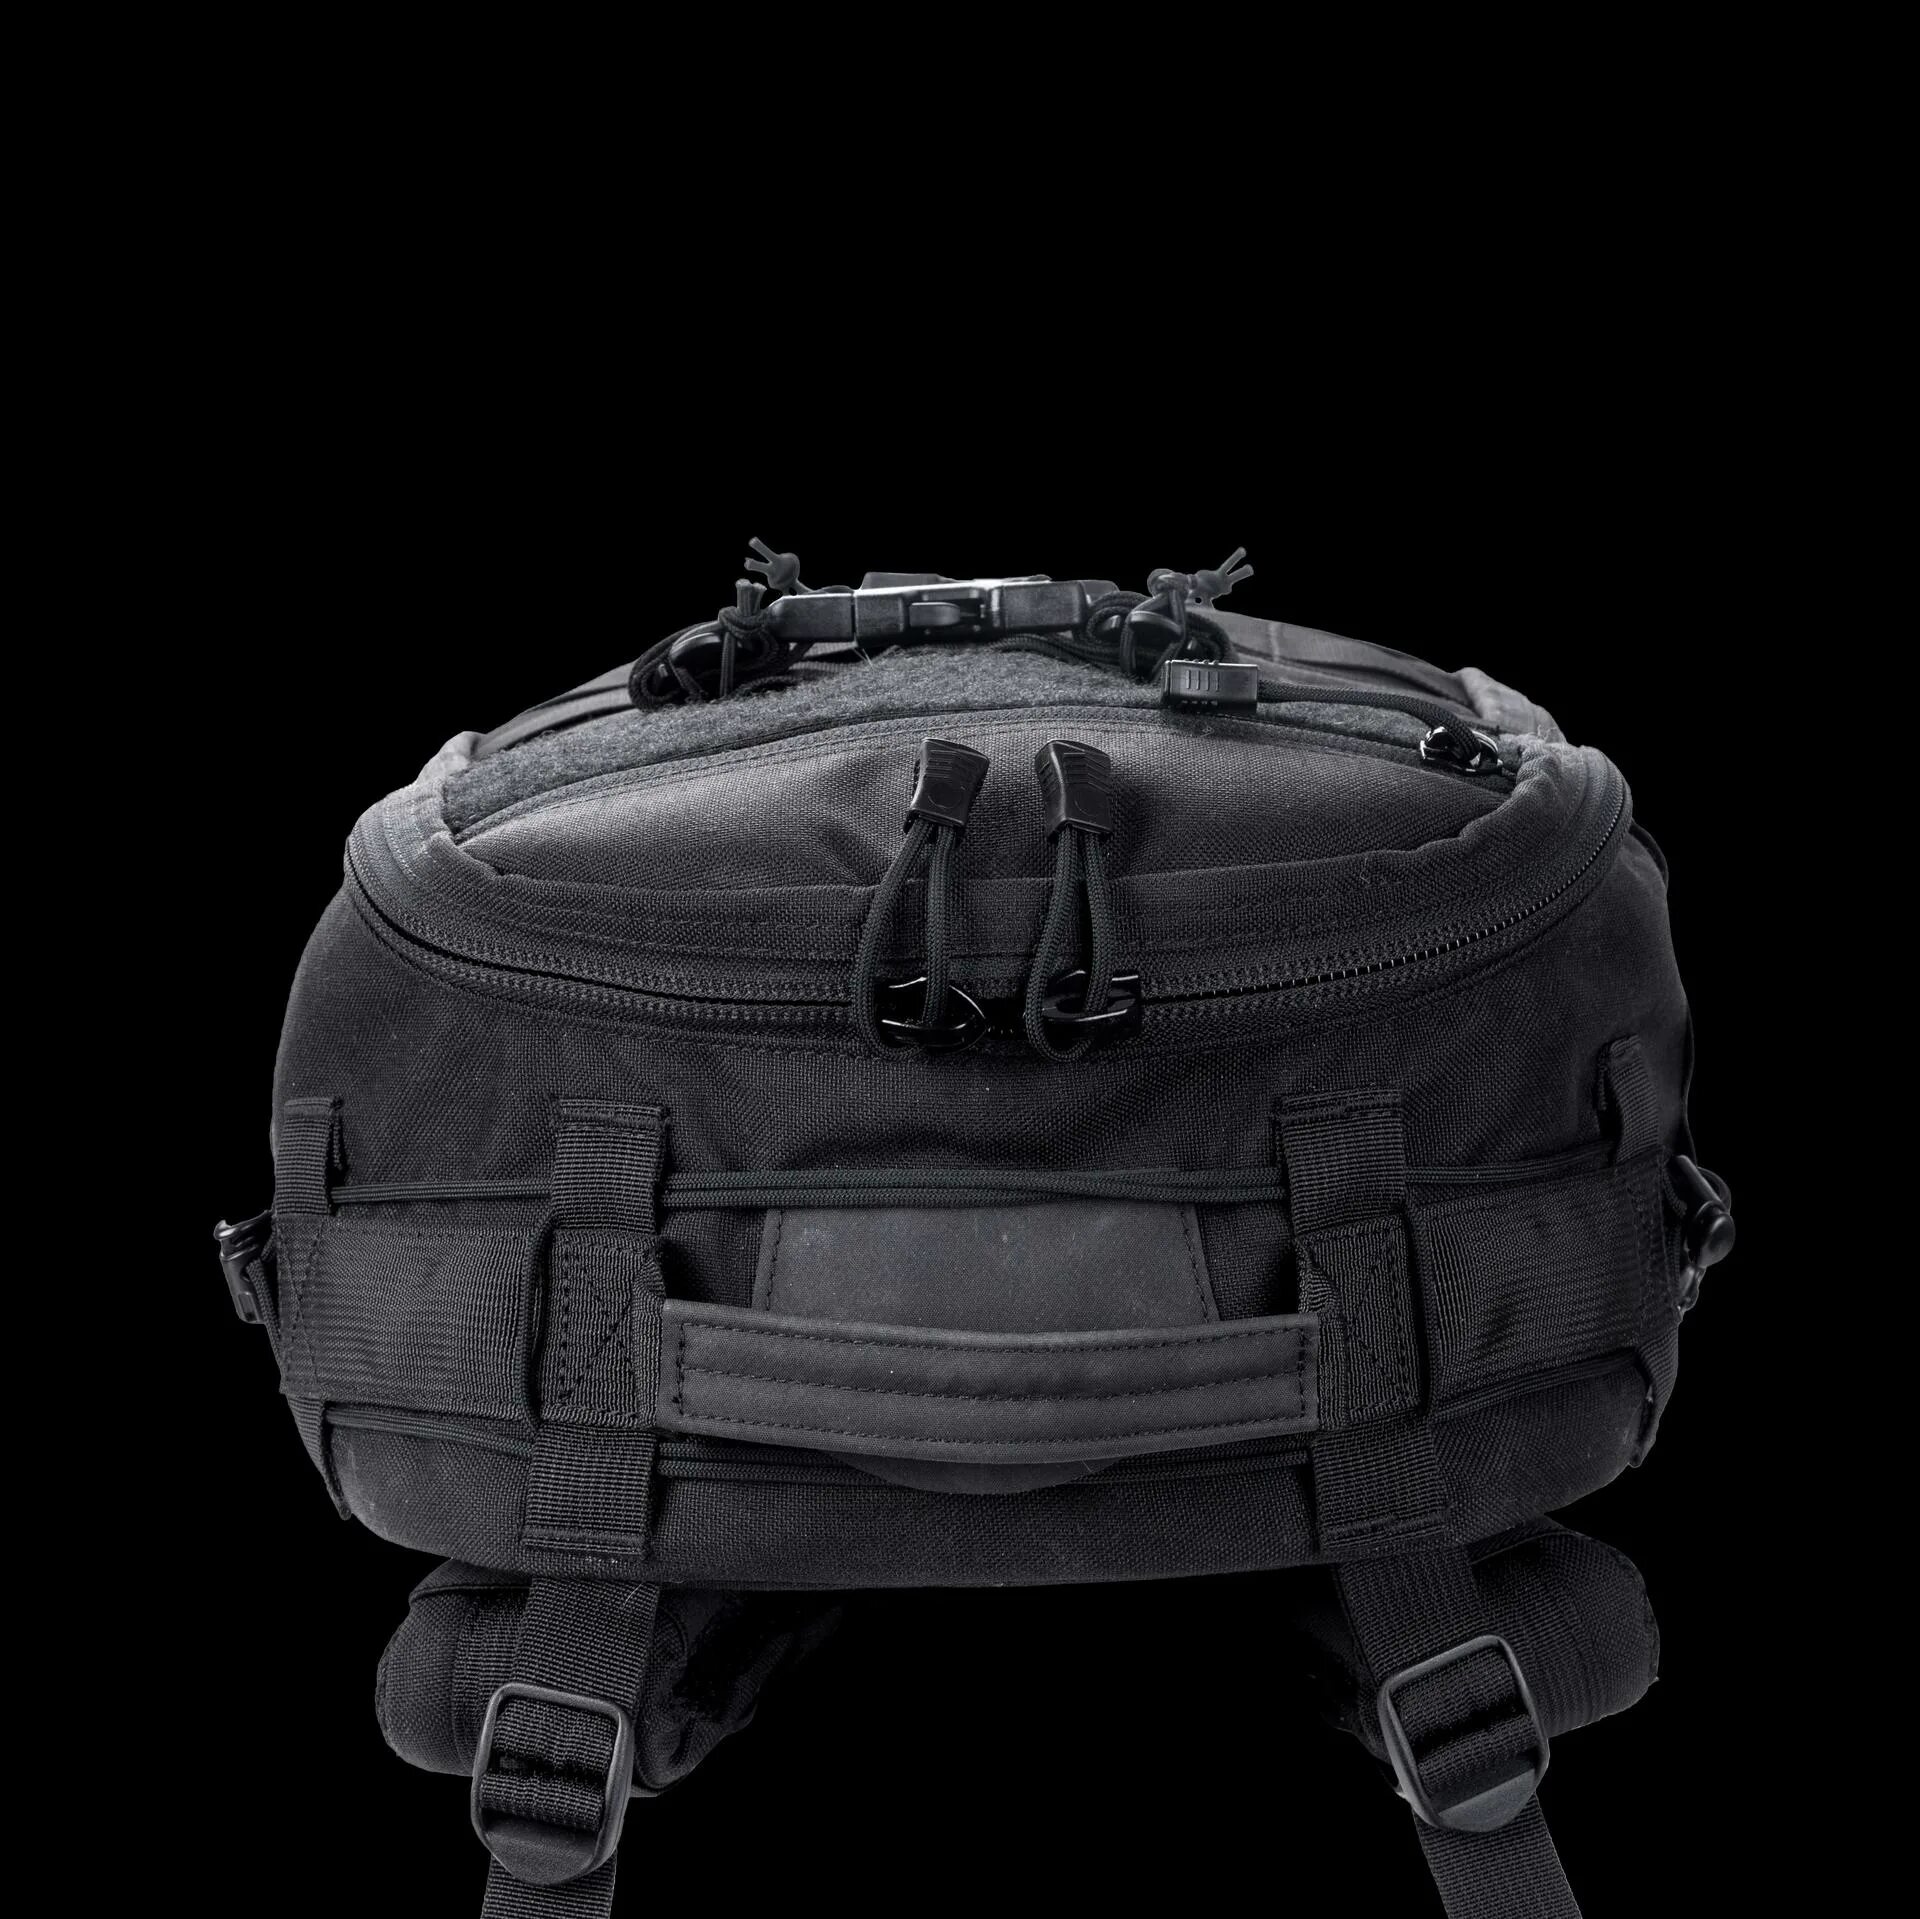 Triple aught Design fast Pack EDC. Tad Gear рюкзак. Tad Gear Dispatch Bag. Tad (Triple aught Design) thrifting. Pack fast